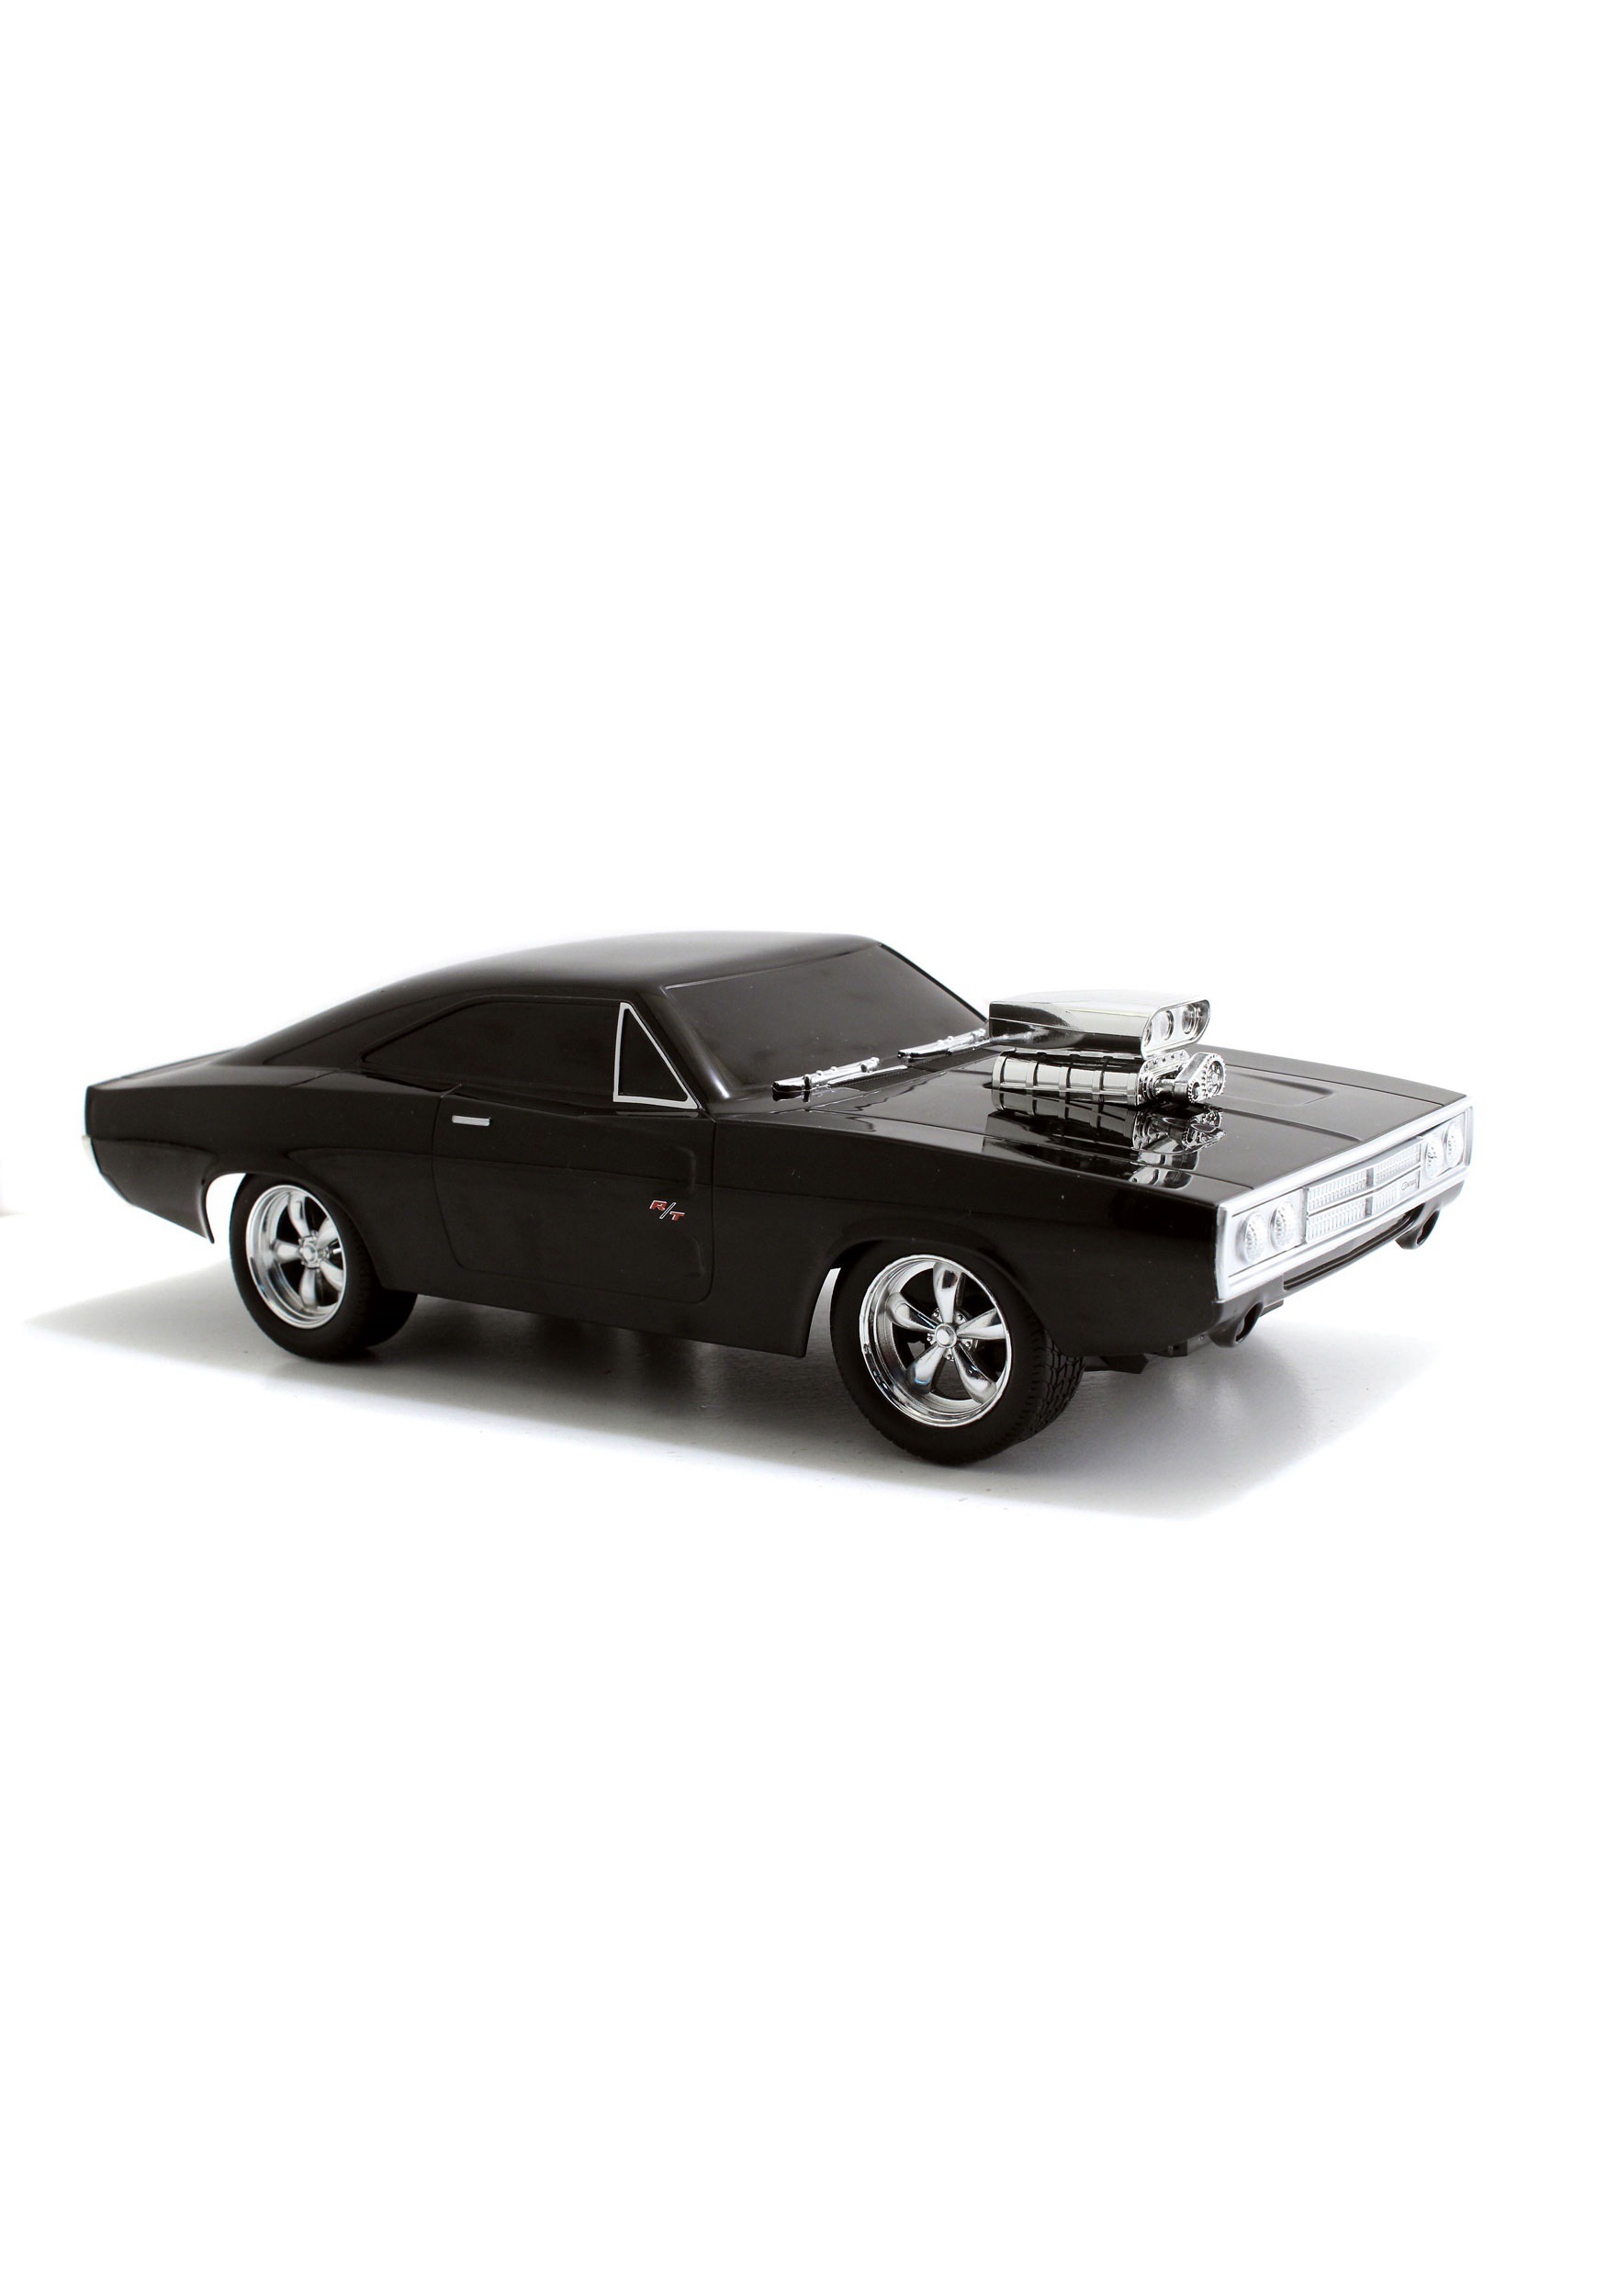 The Fast & The Furious Dodge Charger 1:16 RC